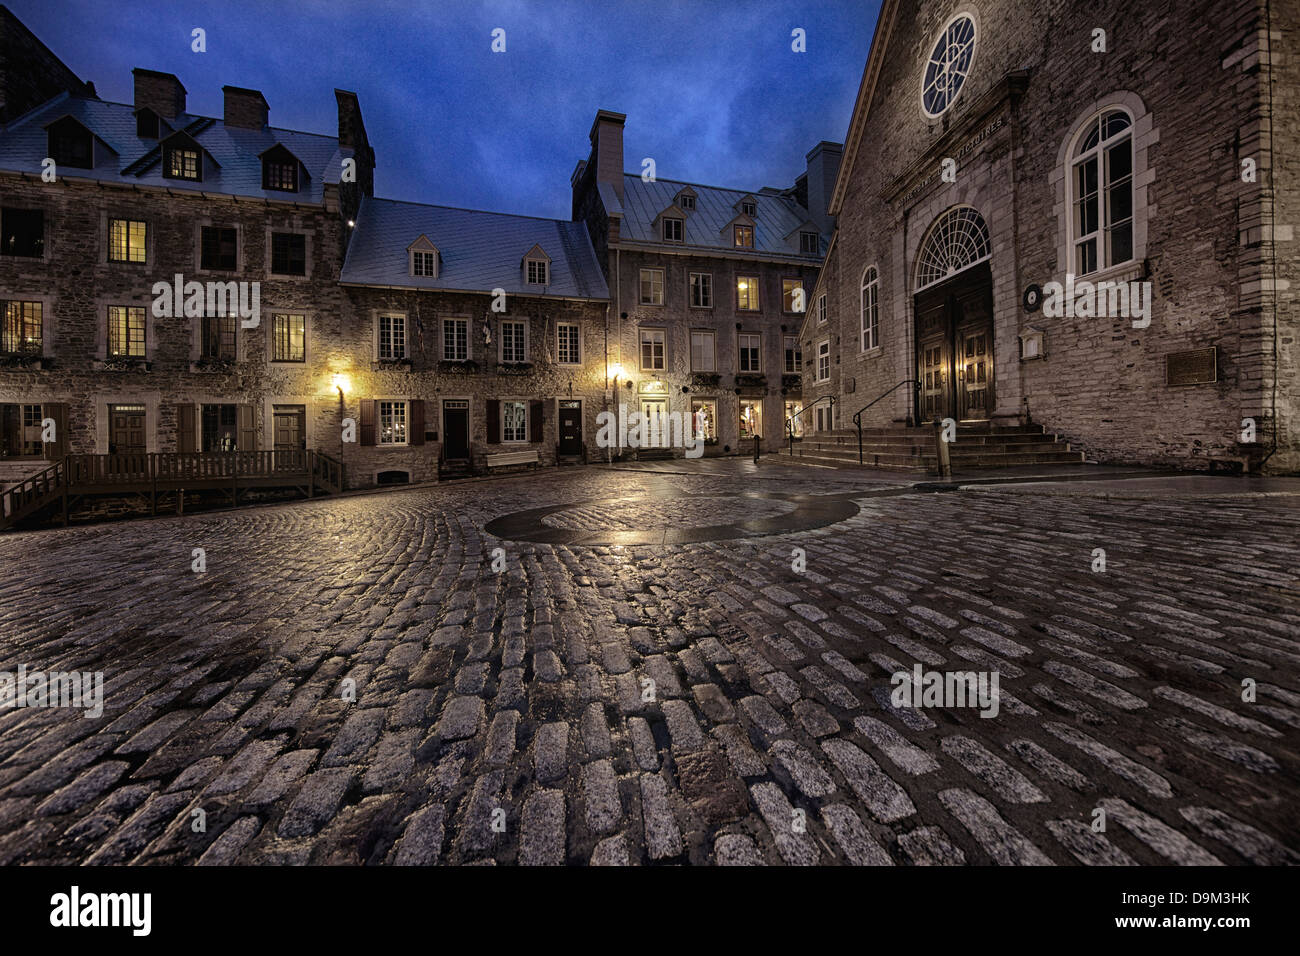 The heart of Place Royale, the 17th century reconstructed old town of Quebec City. Stock Photo